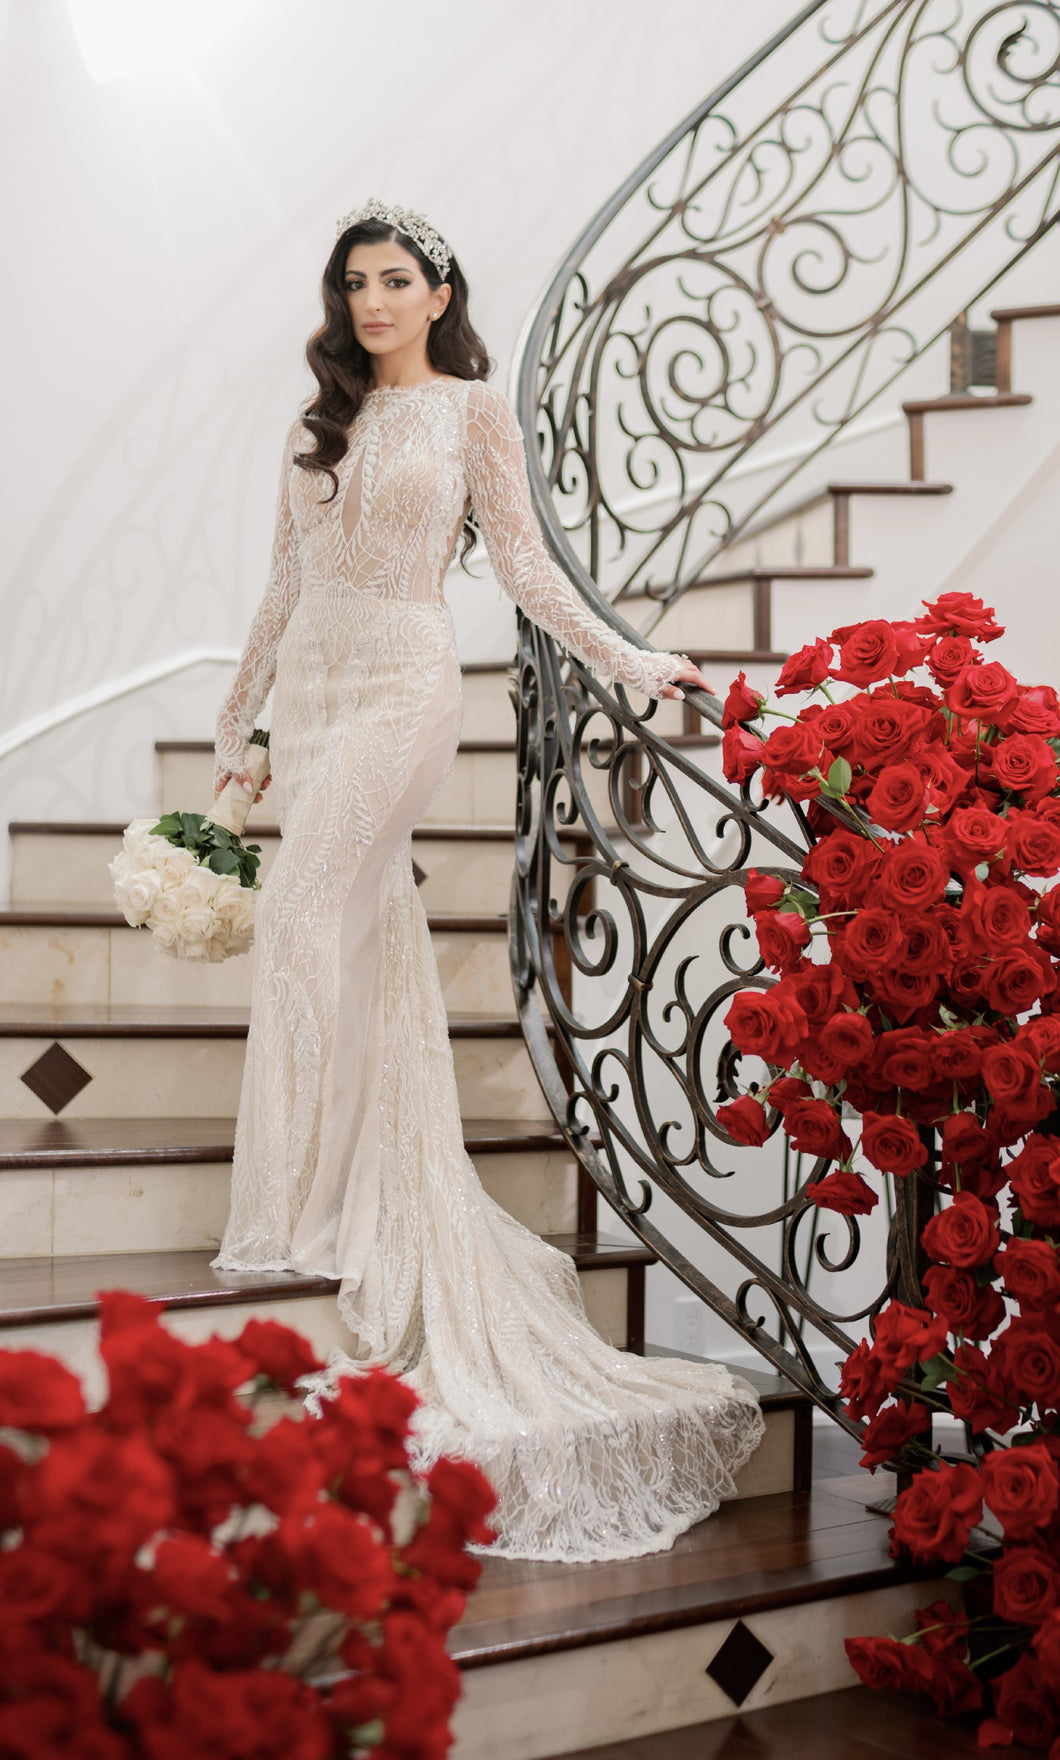 C2024-LS119 - backless beaded wedding gown with sheer long sleeves